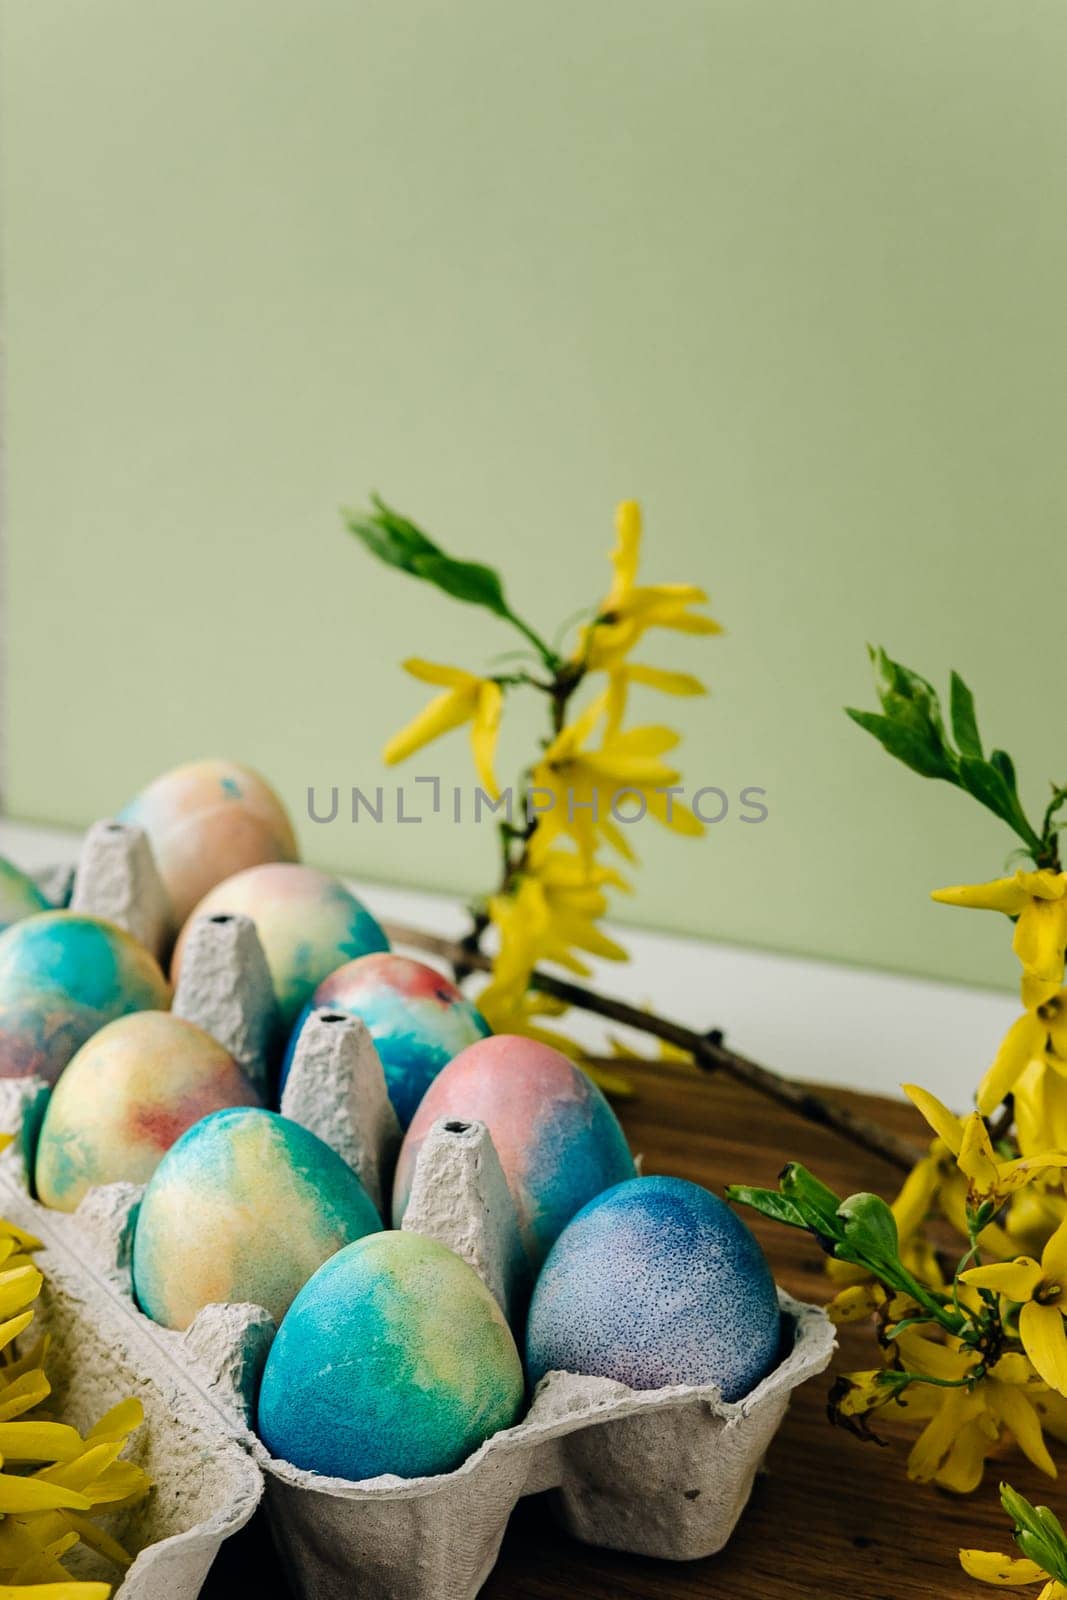 Colorful dyed easter eggs in blue and red shades by Anyatachka